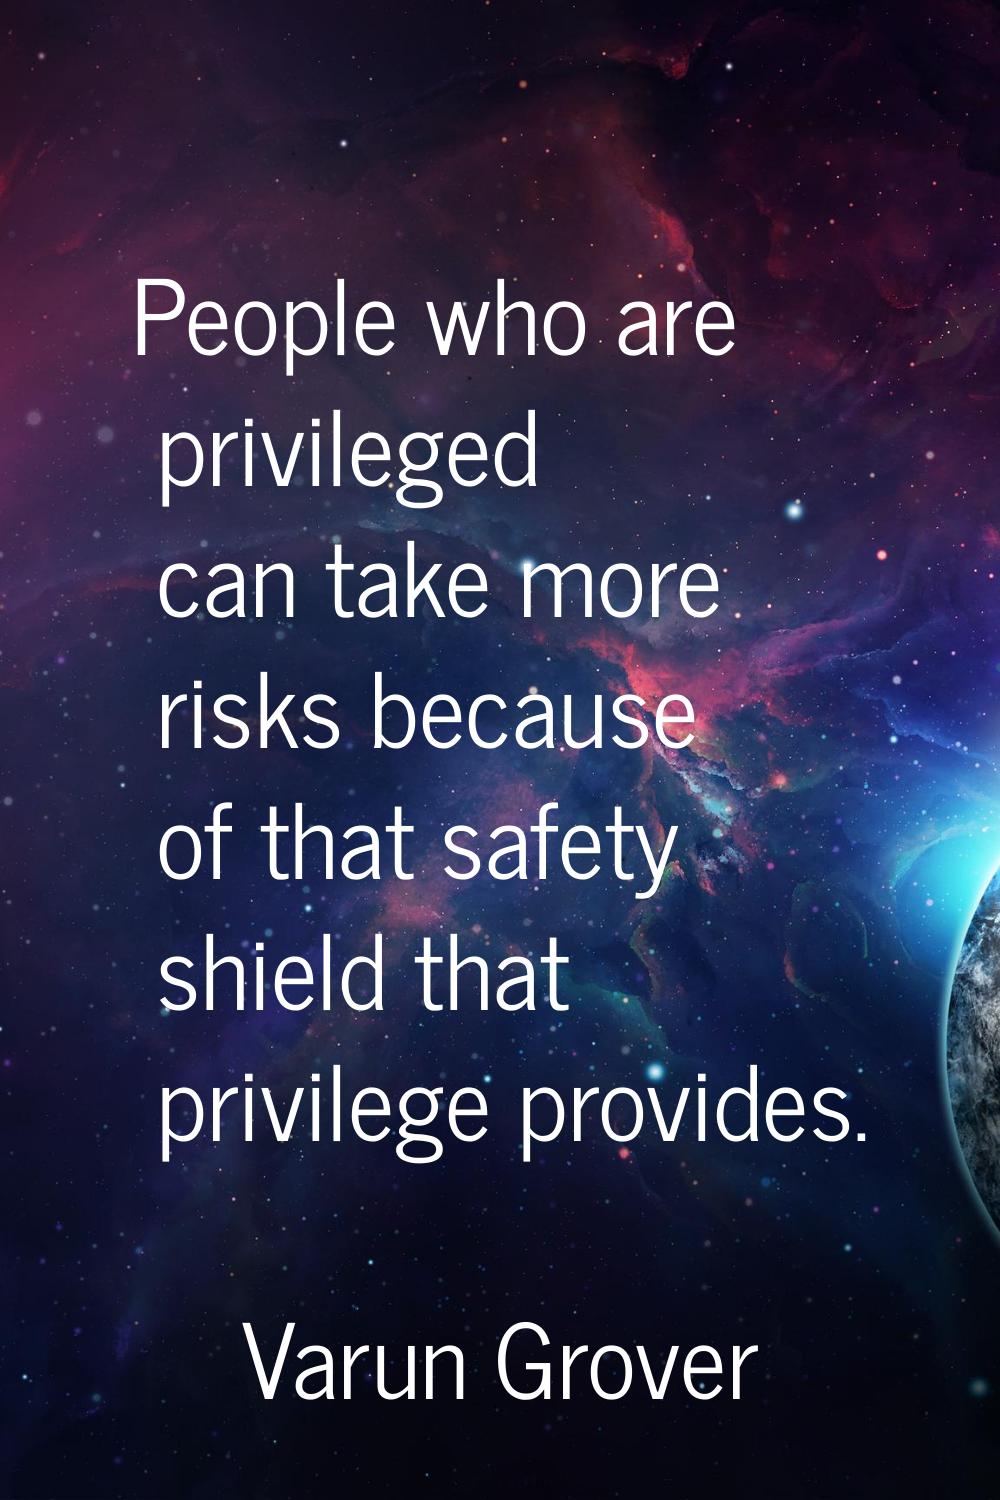 People who are privileged can take more risks because of that safety shield that privilege provides